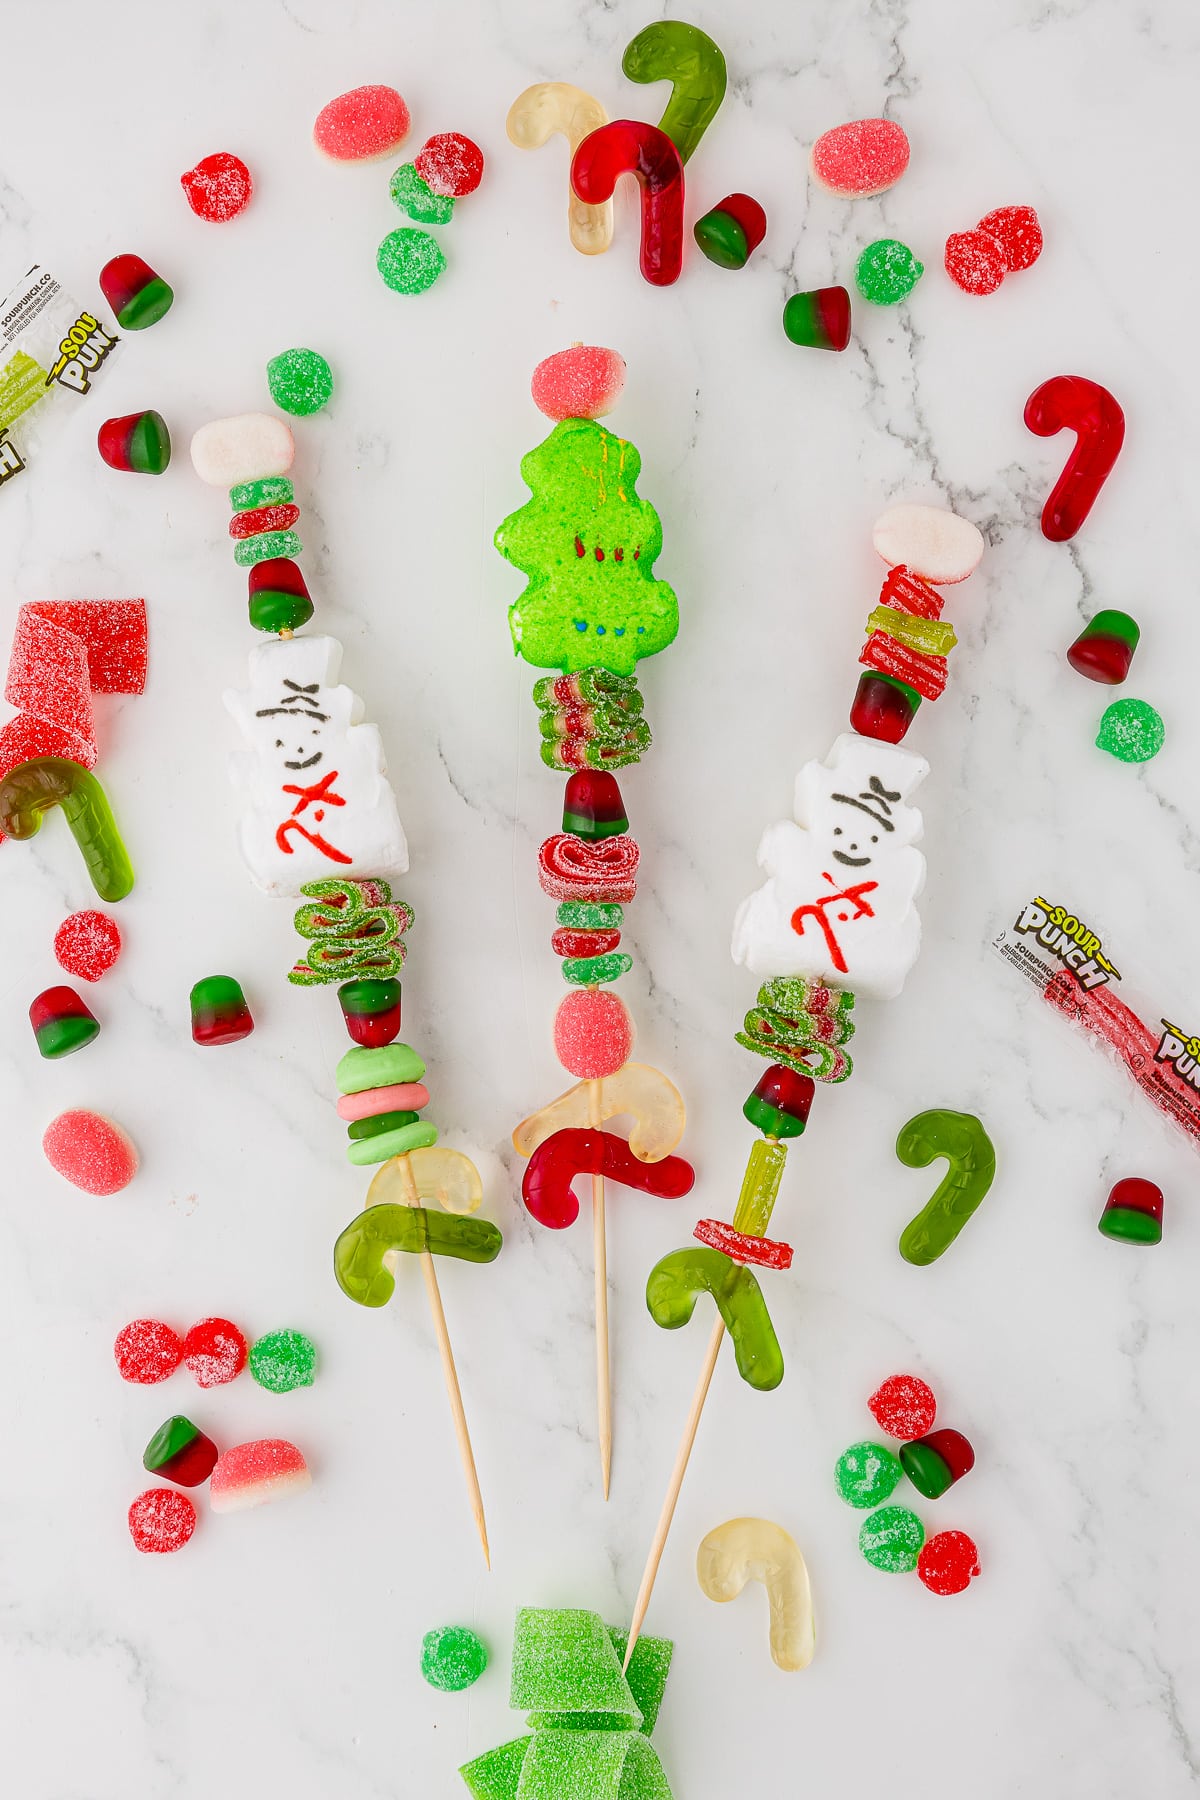 Skewers with assorted gummy Christmas candies on a shite countertop